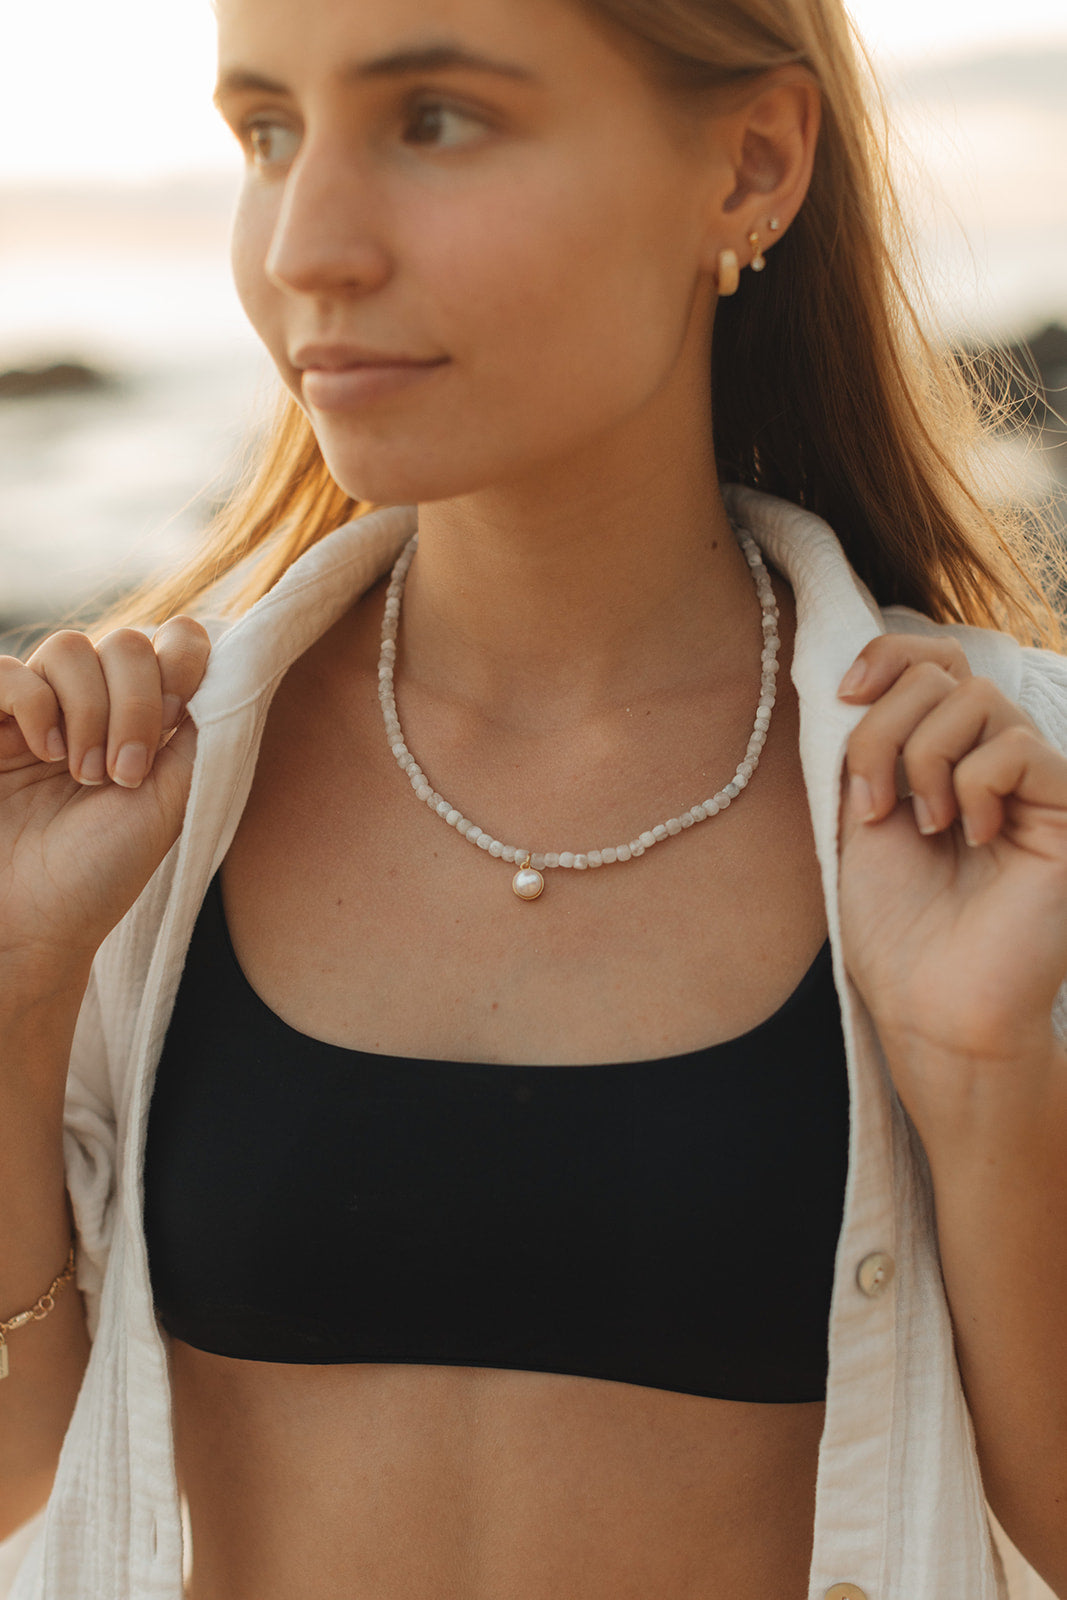 Candace Necklace in Moonstone